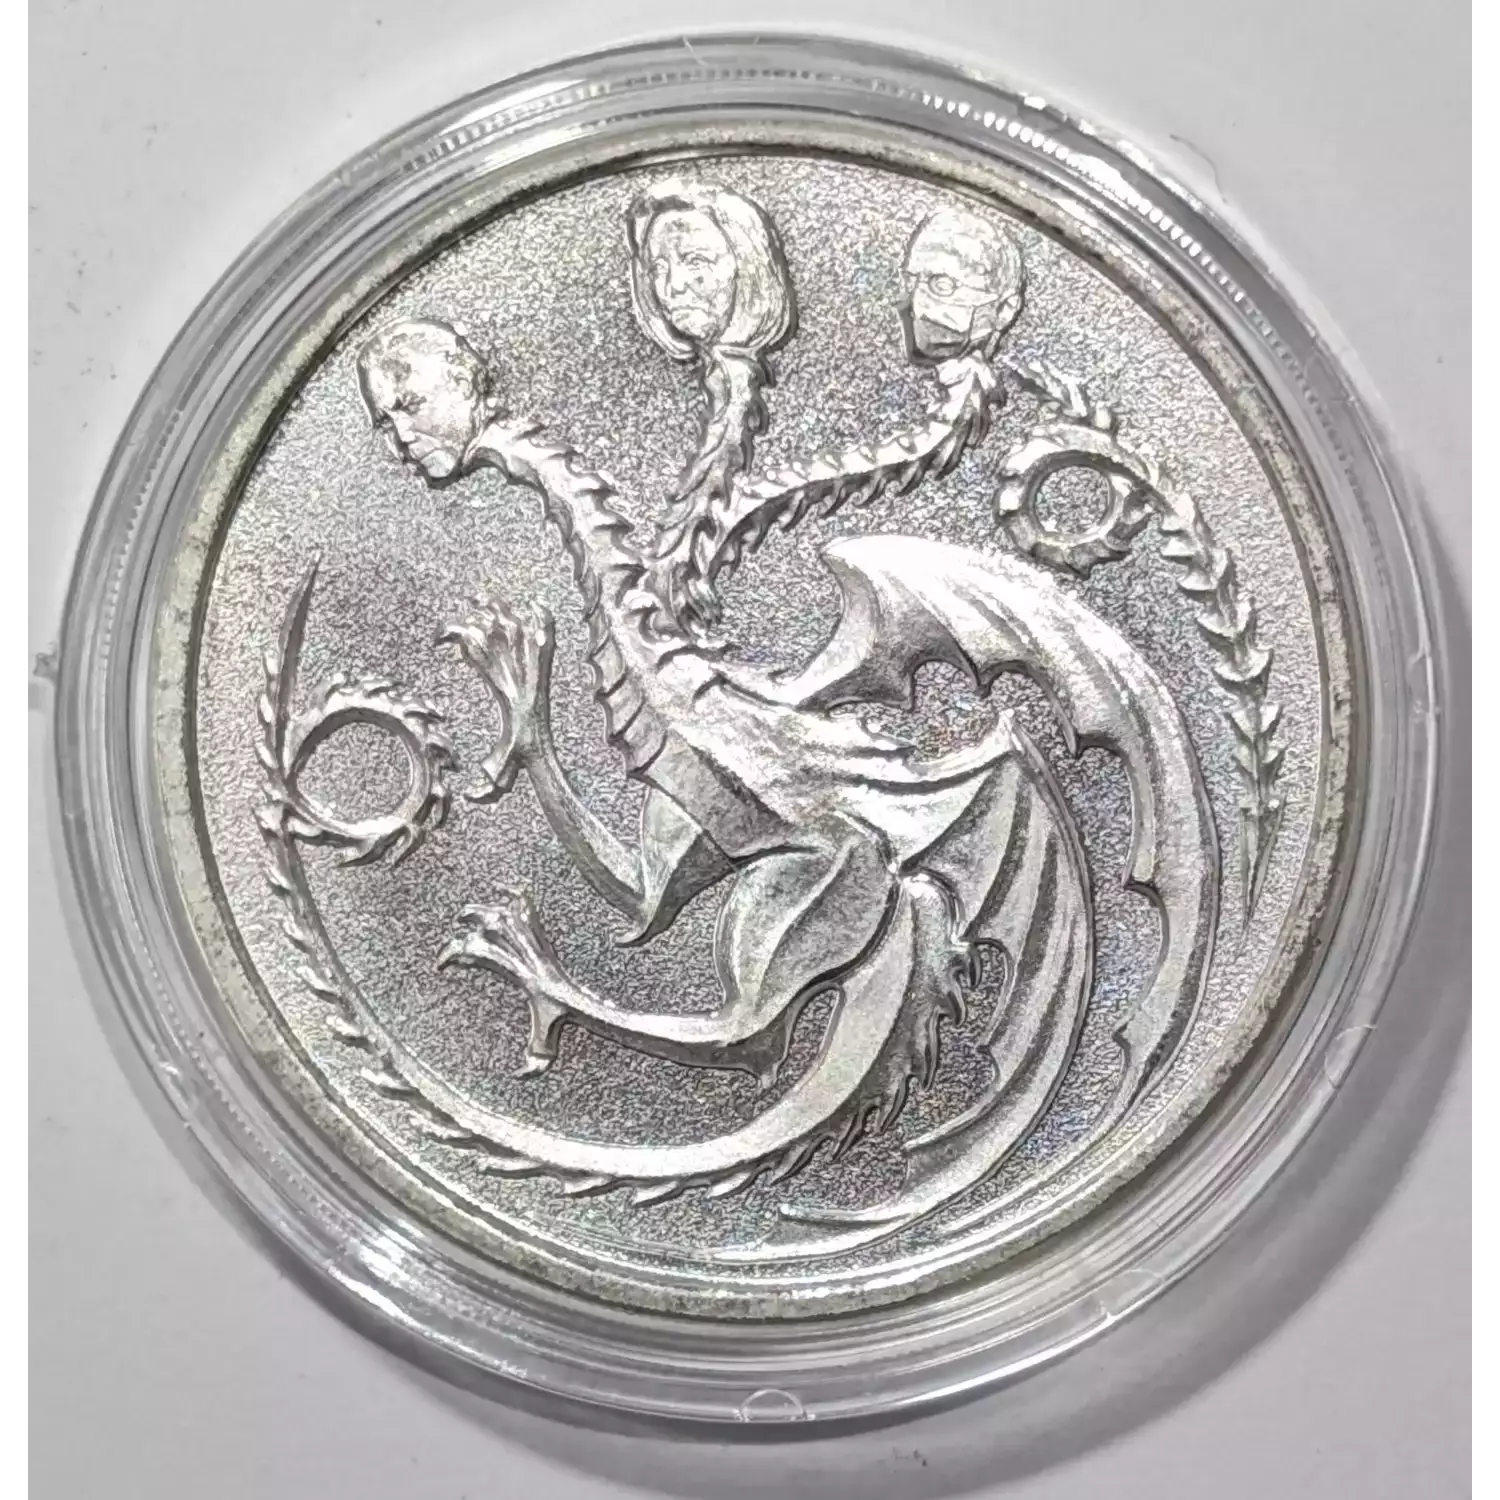 Inflation is Coming 1 oz .999 Silver Round Biden, Fauci, Pelosi - In Capsule